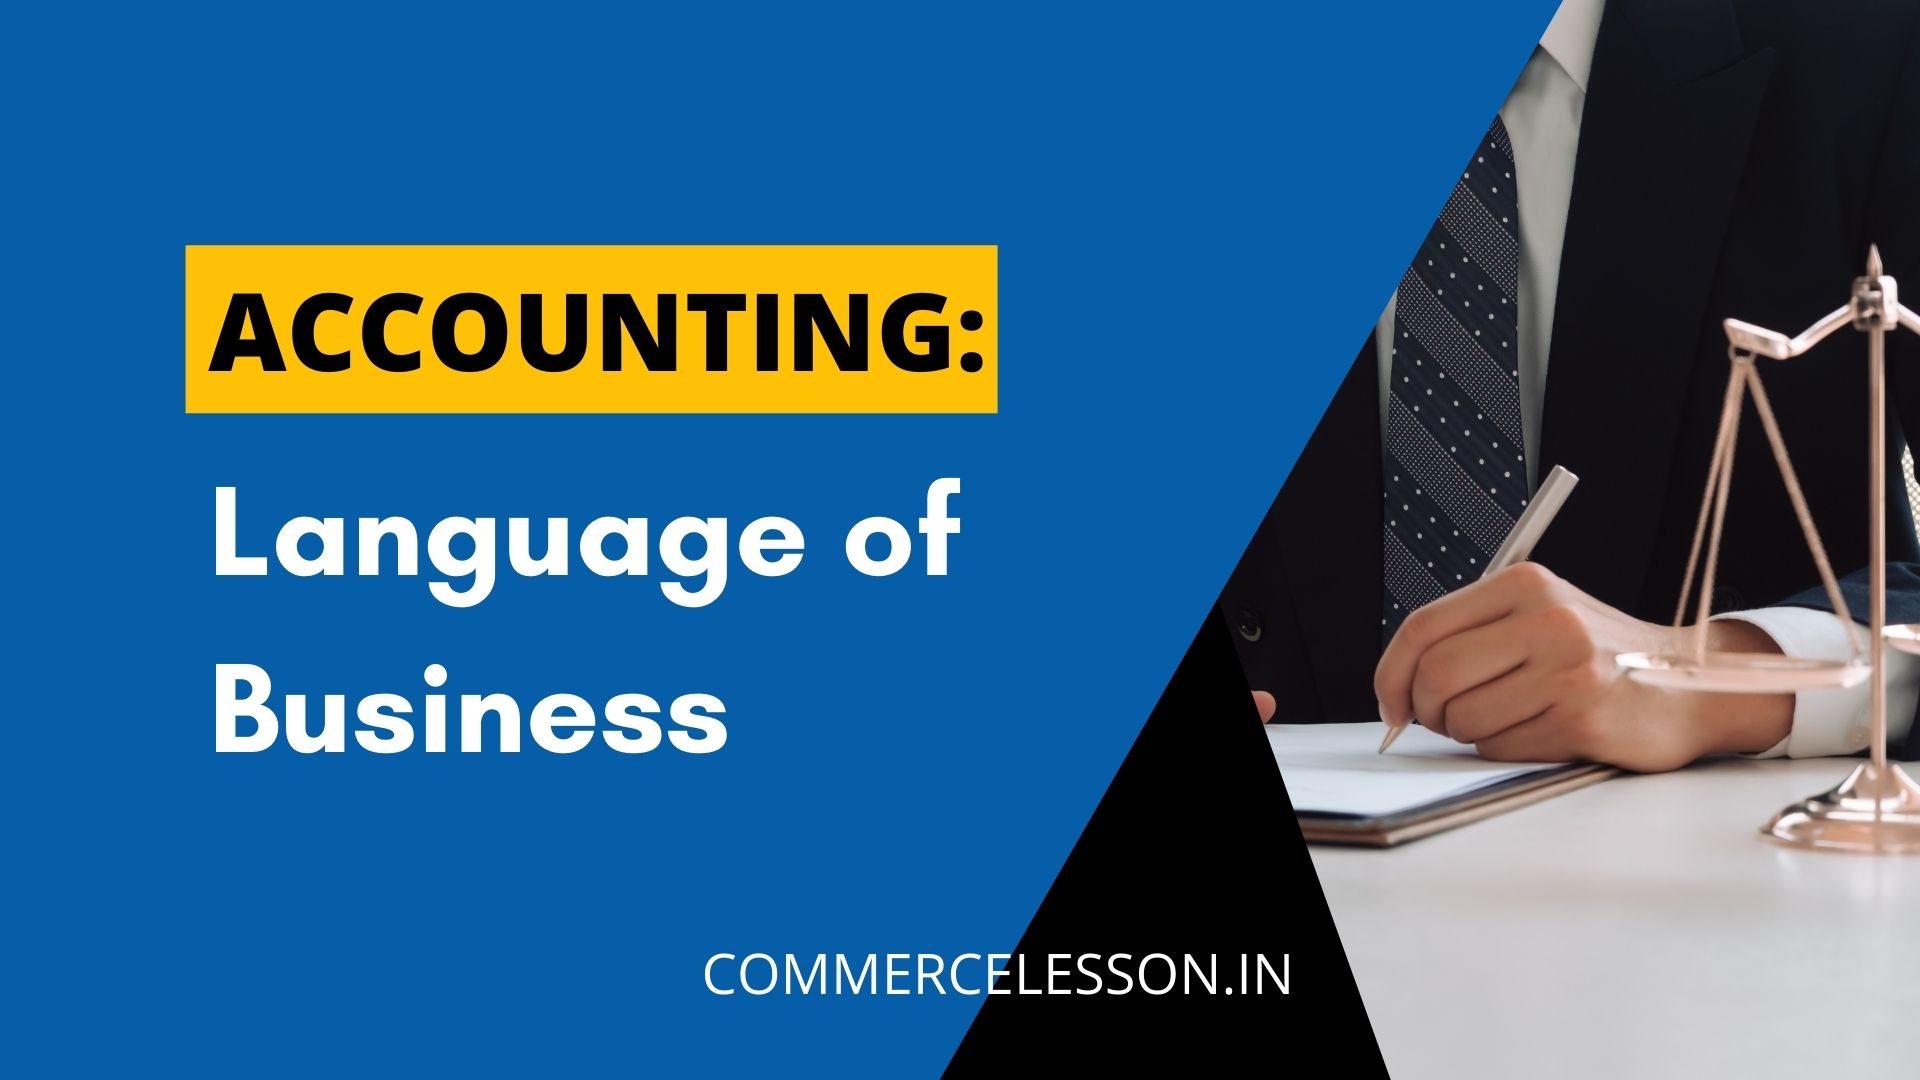 Accounting is the Language of Business